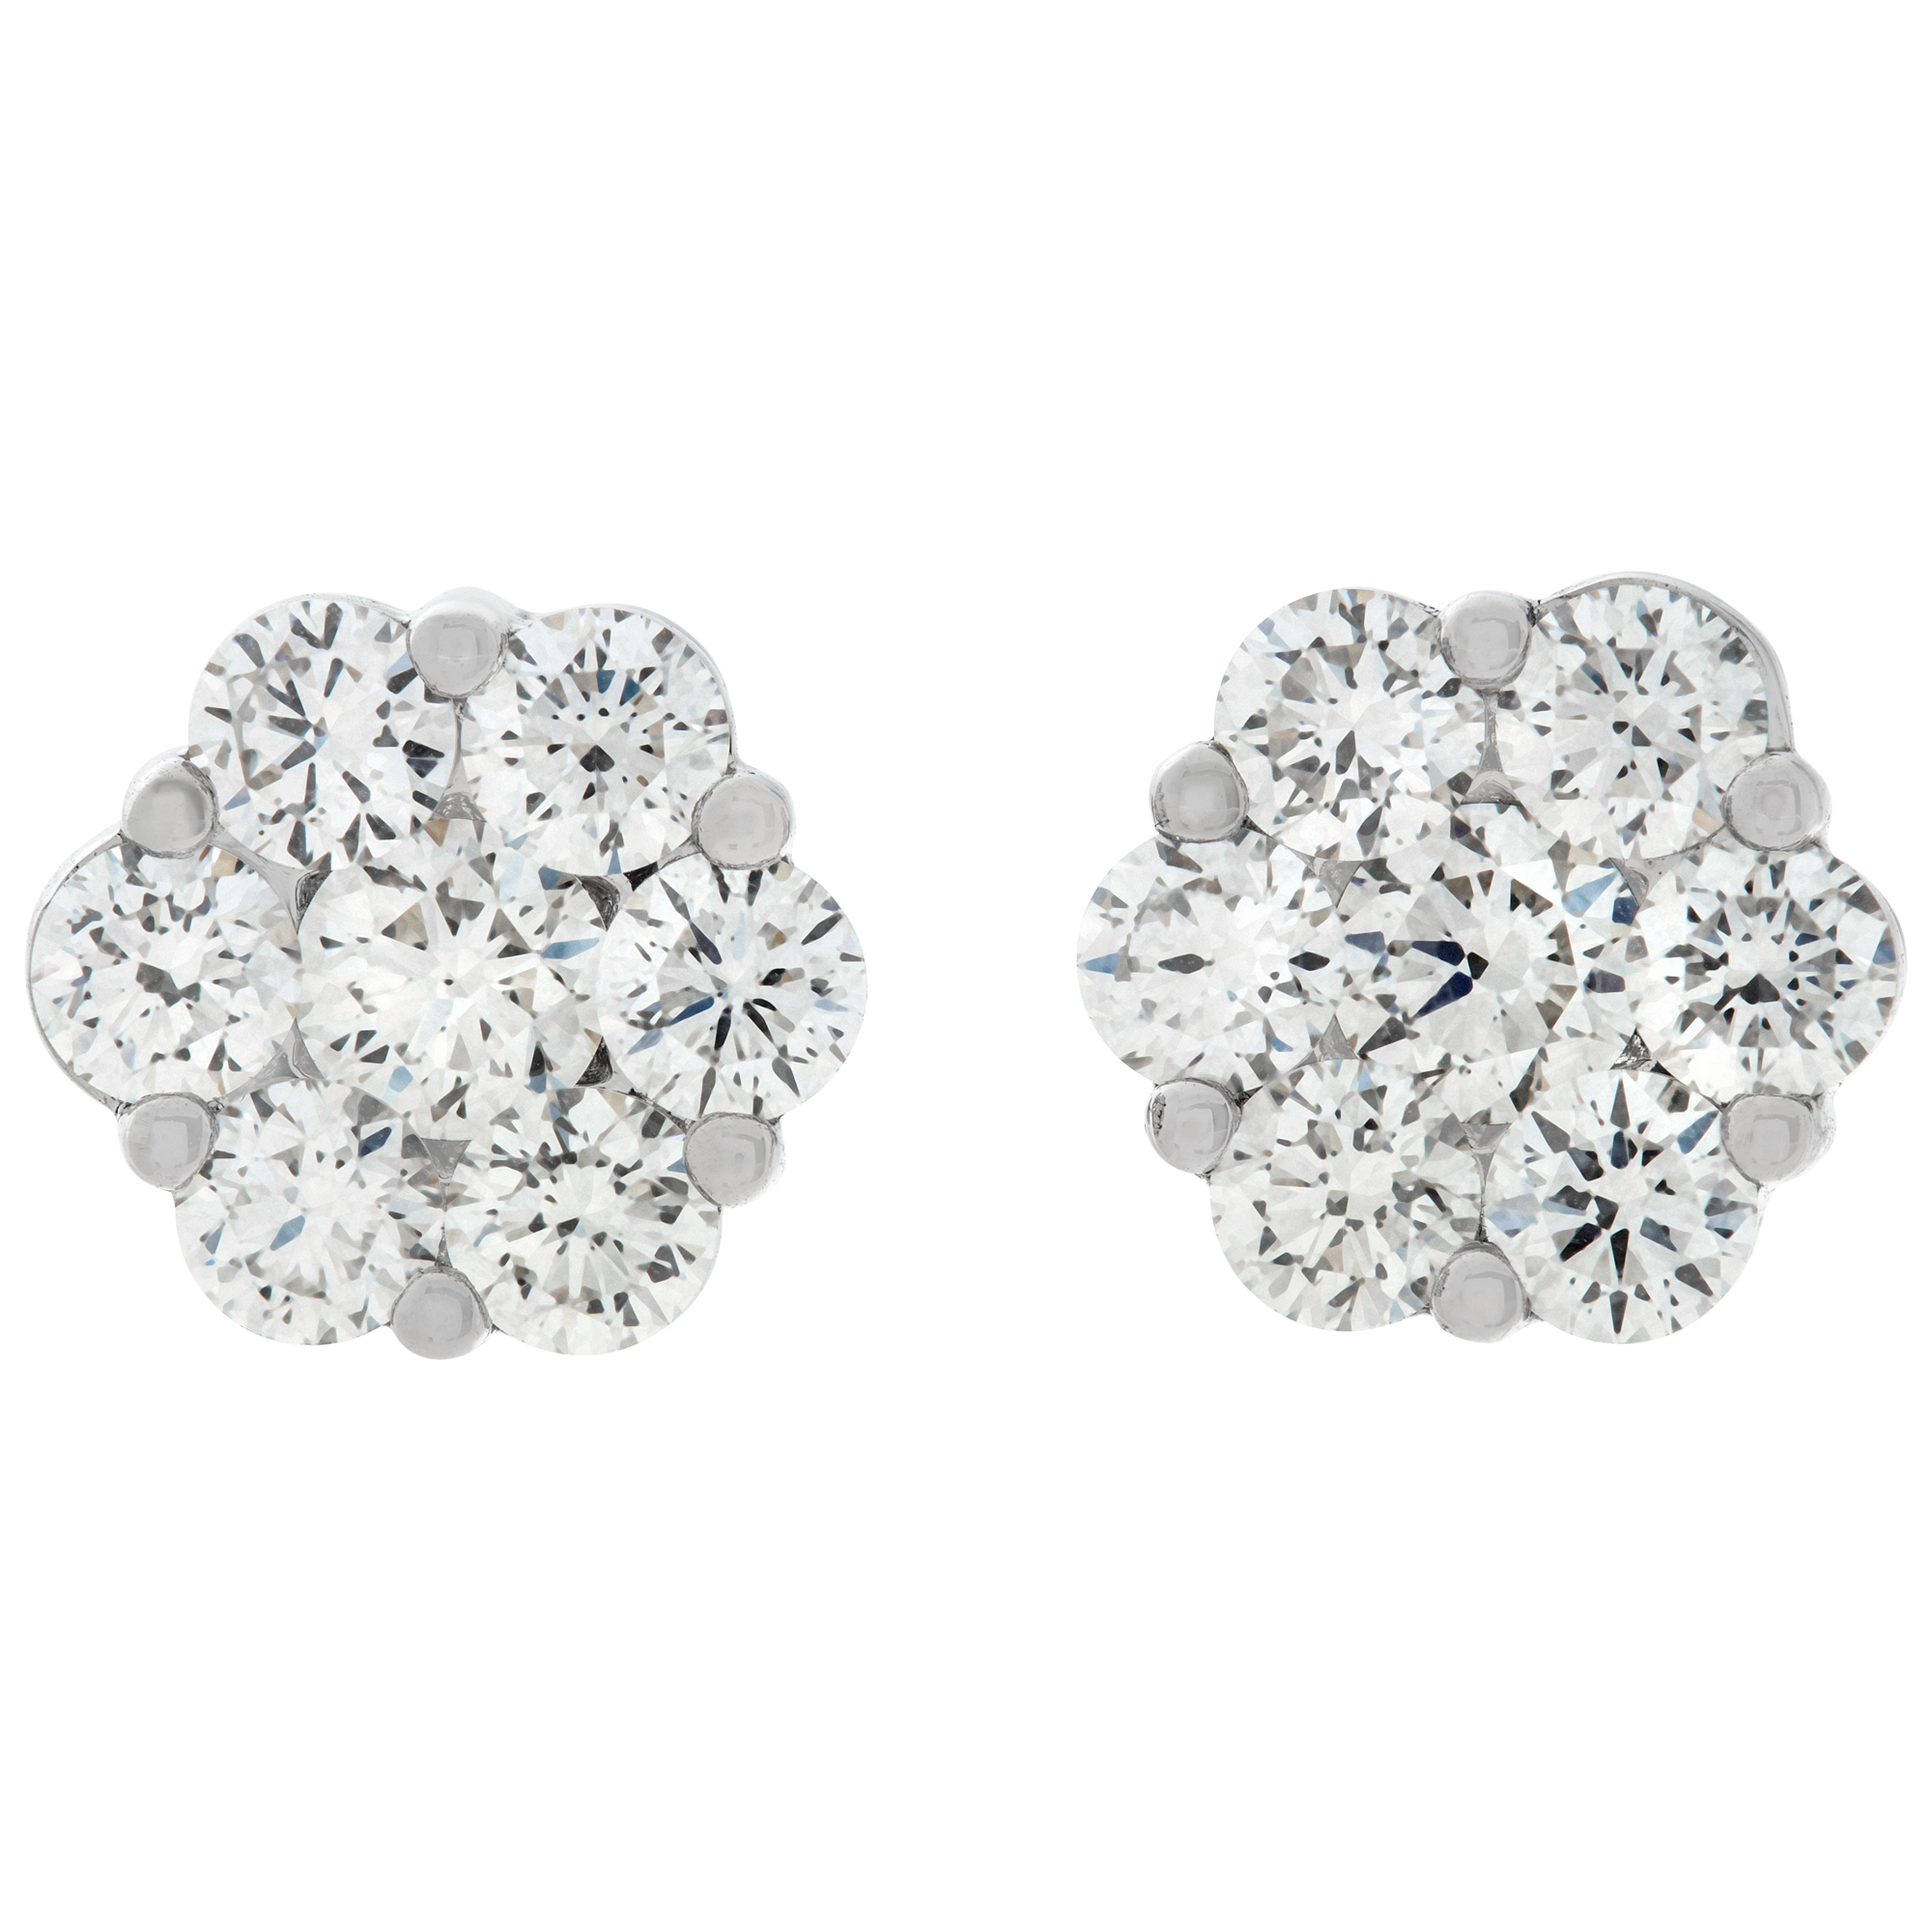 Floral shaped round diamond cluster earrings in 18k white gold with 2.49 carats